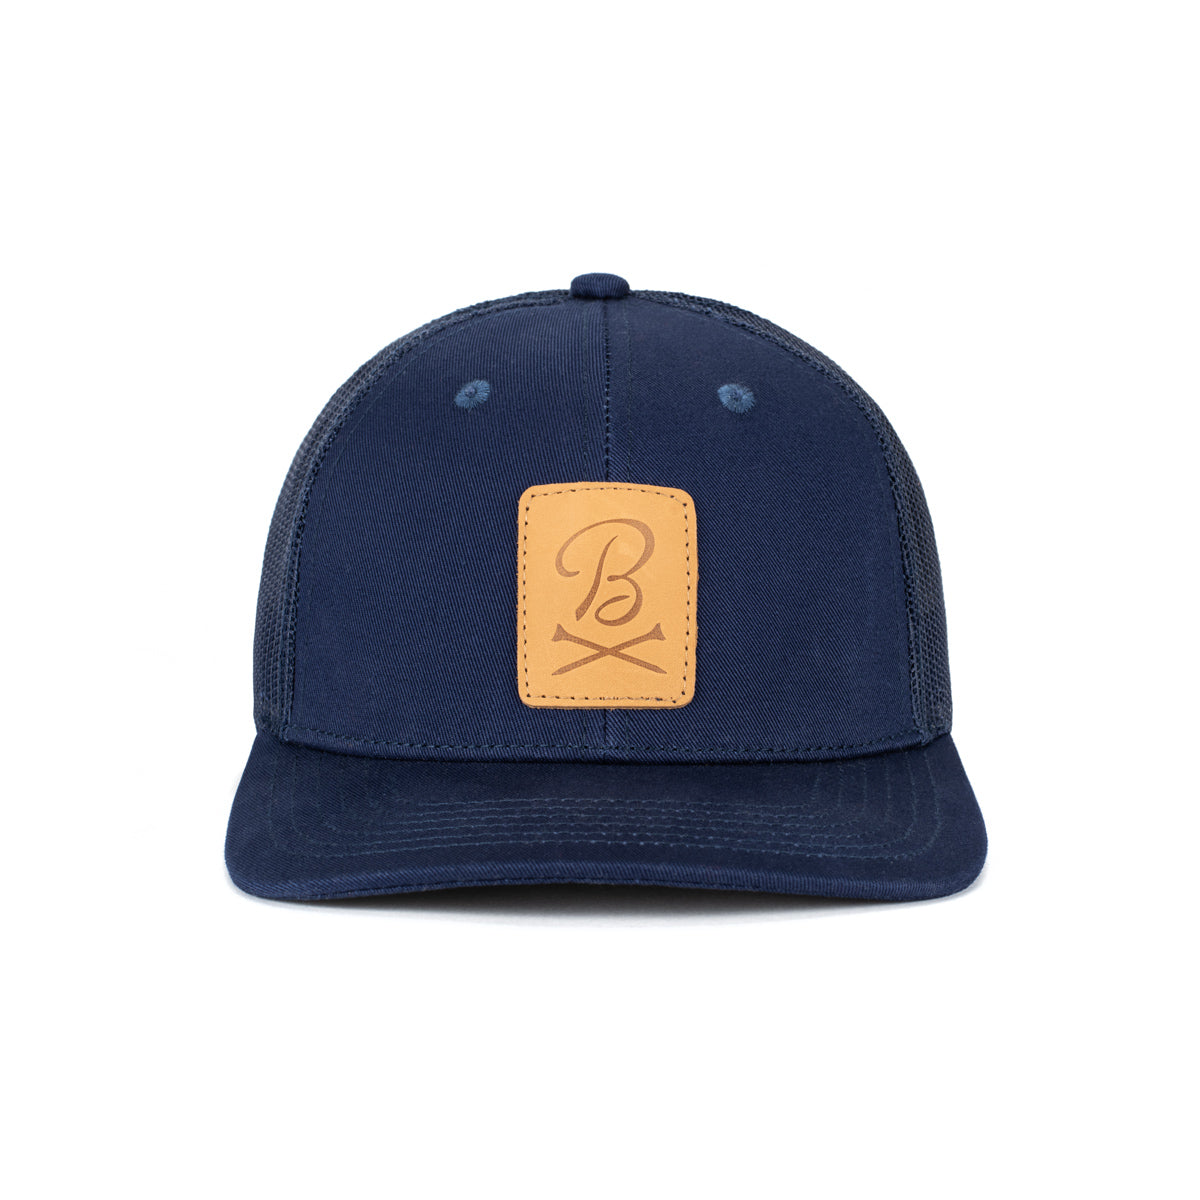 Barstool Golf Leather Patch Trucker Hat-Hats-Fore Play-Navy-Barstool Sports